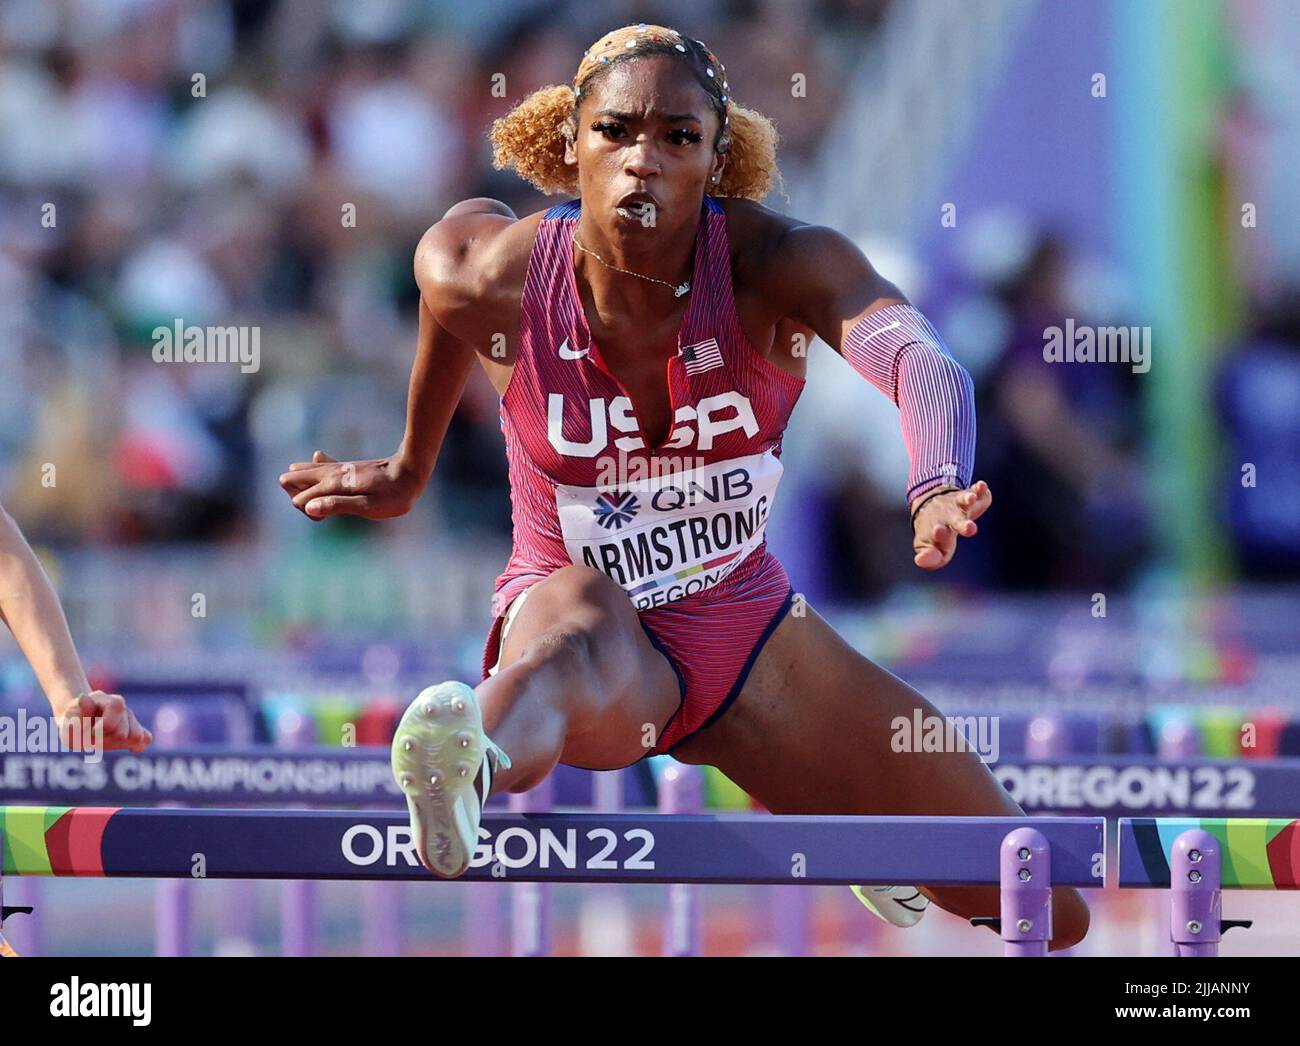 Athletics - World Athletics Championships - Women's 100 Metres Hurdles - Semi Final - Hayward Field, Eugene, Oregon, U.S. - July 24, 2022 Alia Armstrong of the U.S. in action during her semi final REUTERS/Lucy Nicholson Stock Photo